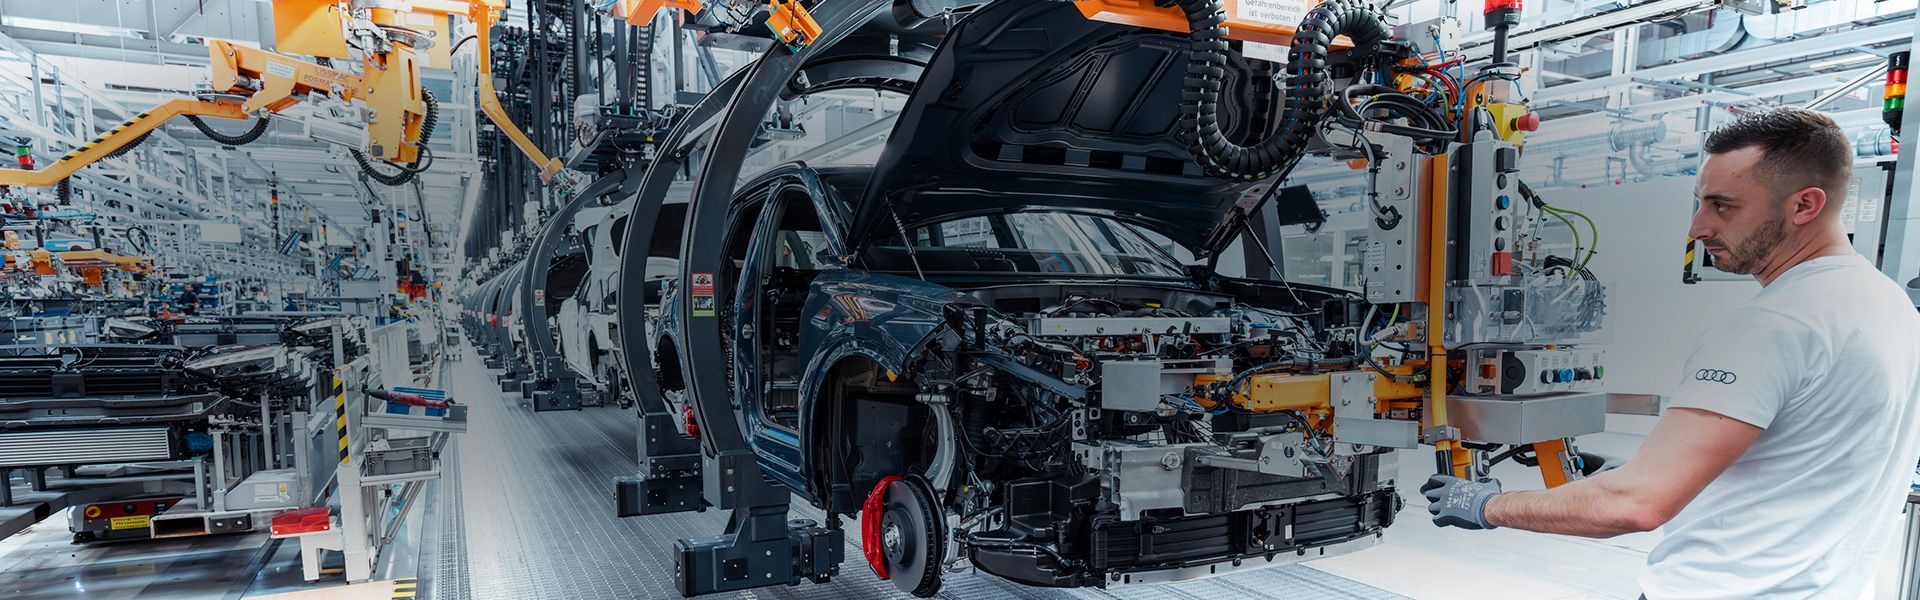 Electromobility: assembly on a new level